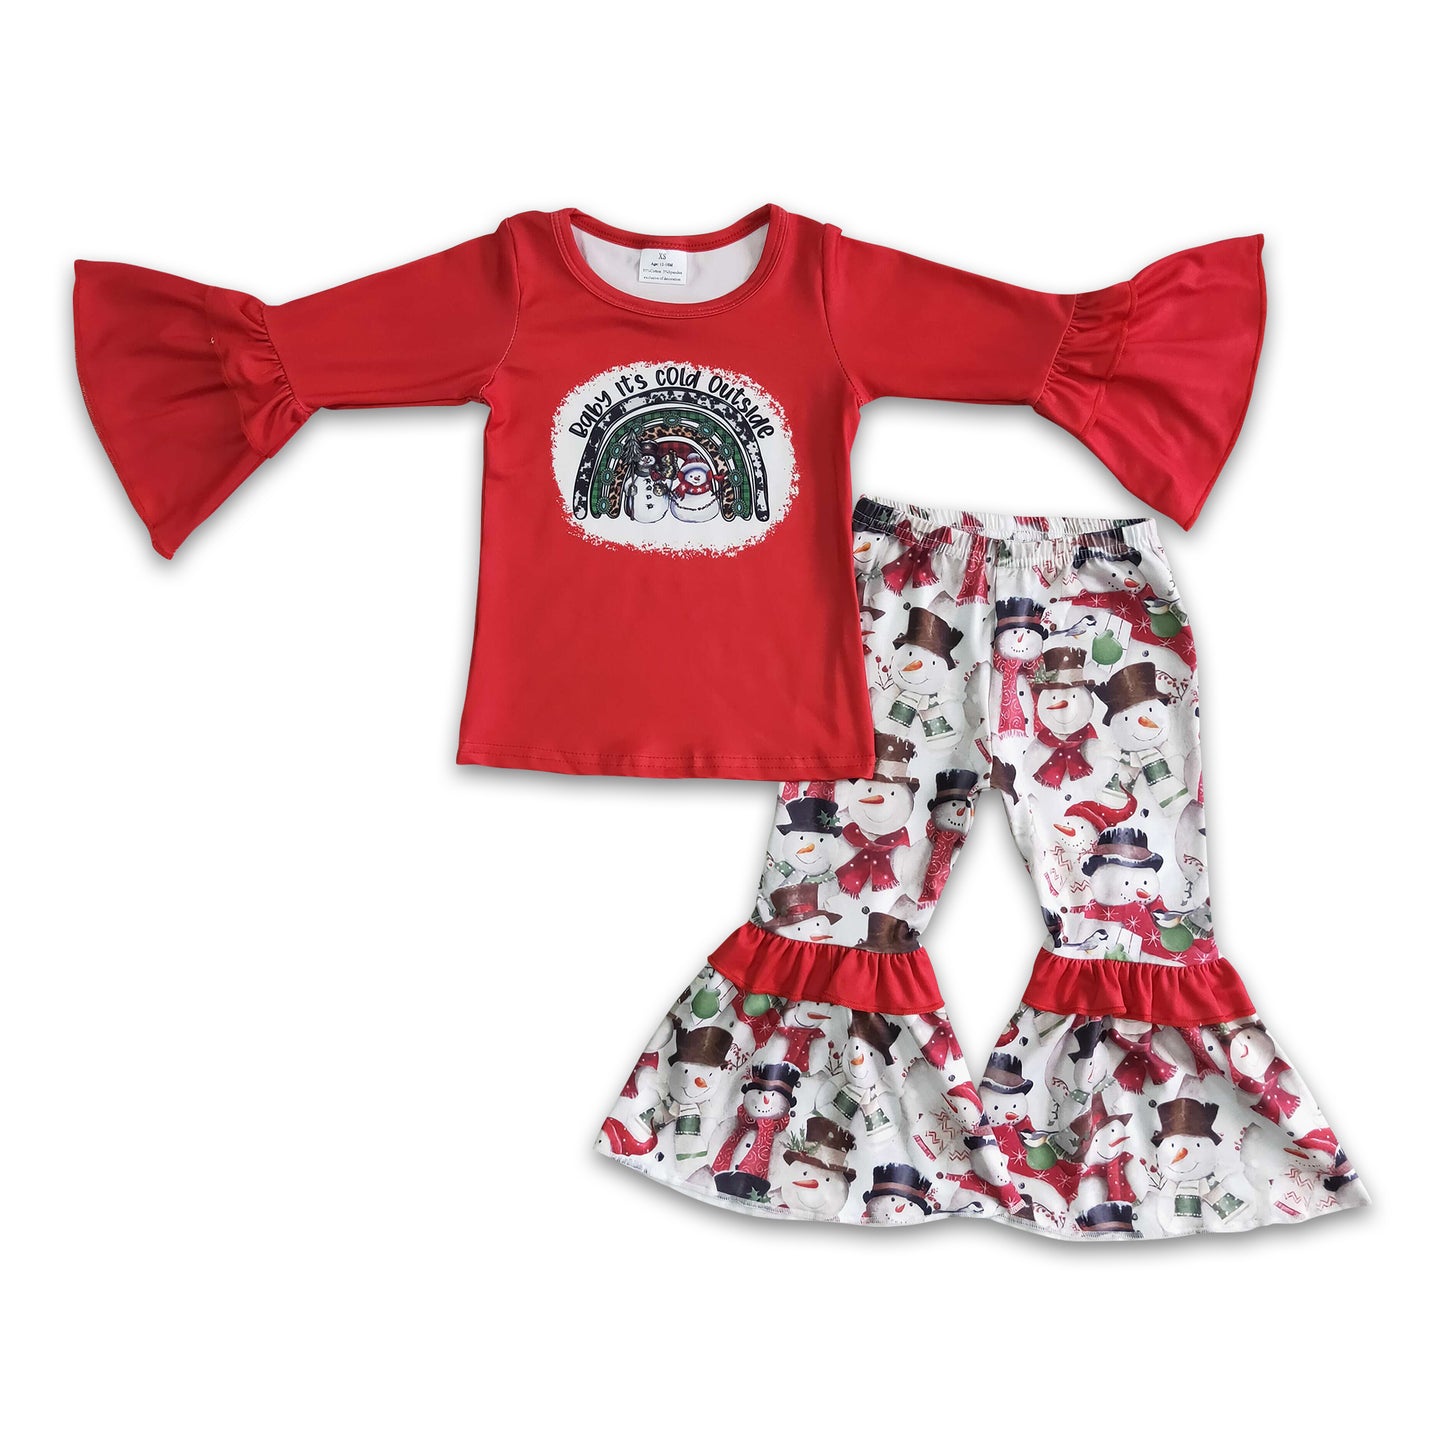 Baby it's cold outside baby girls Christmas clothing